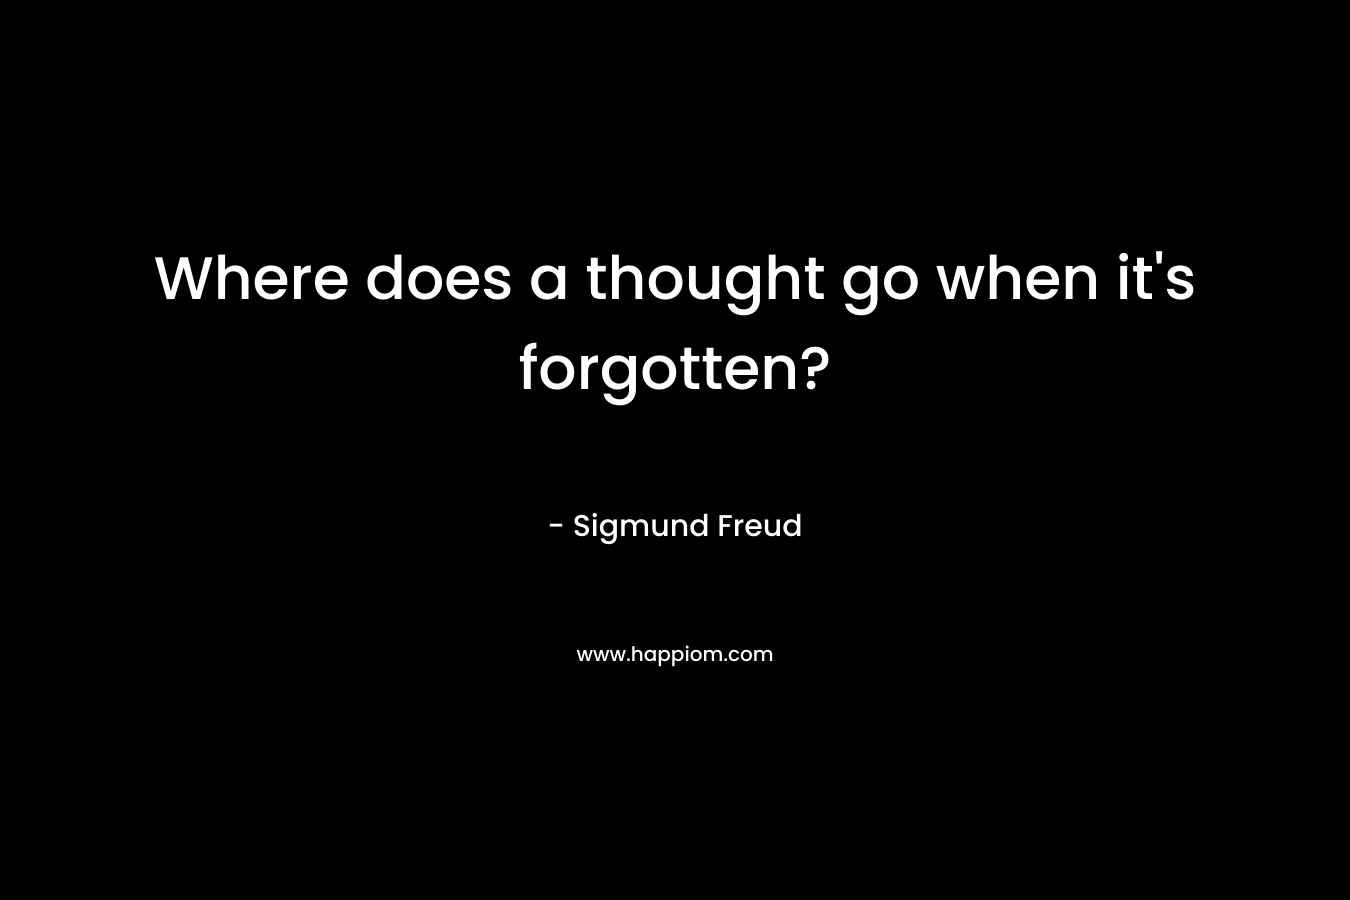 Where does a thought go when it's forgotten?